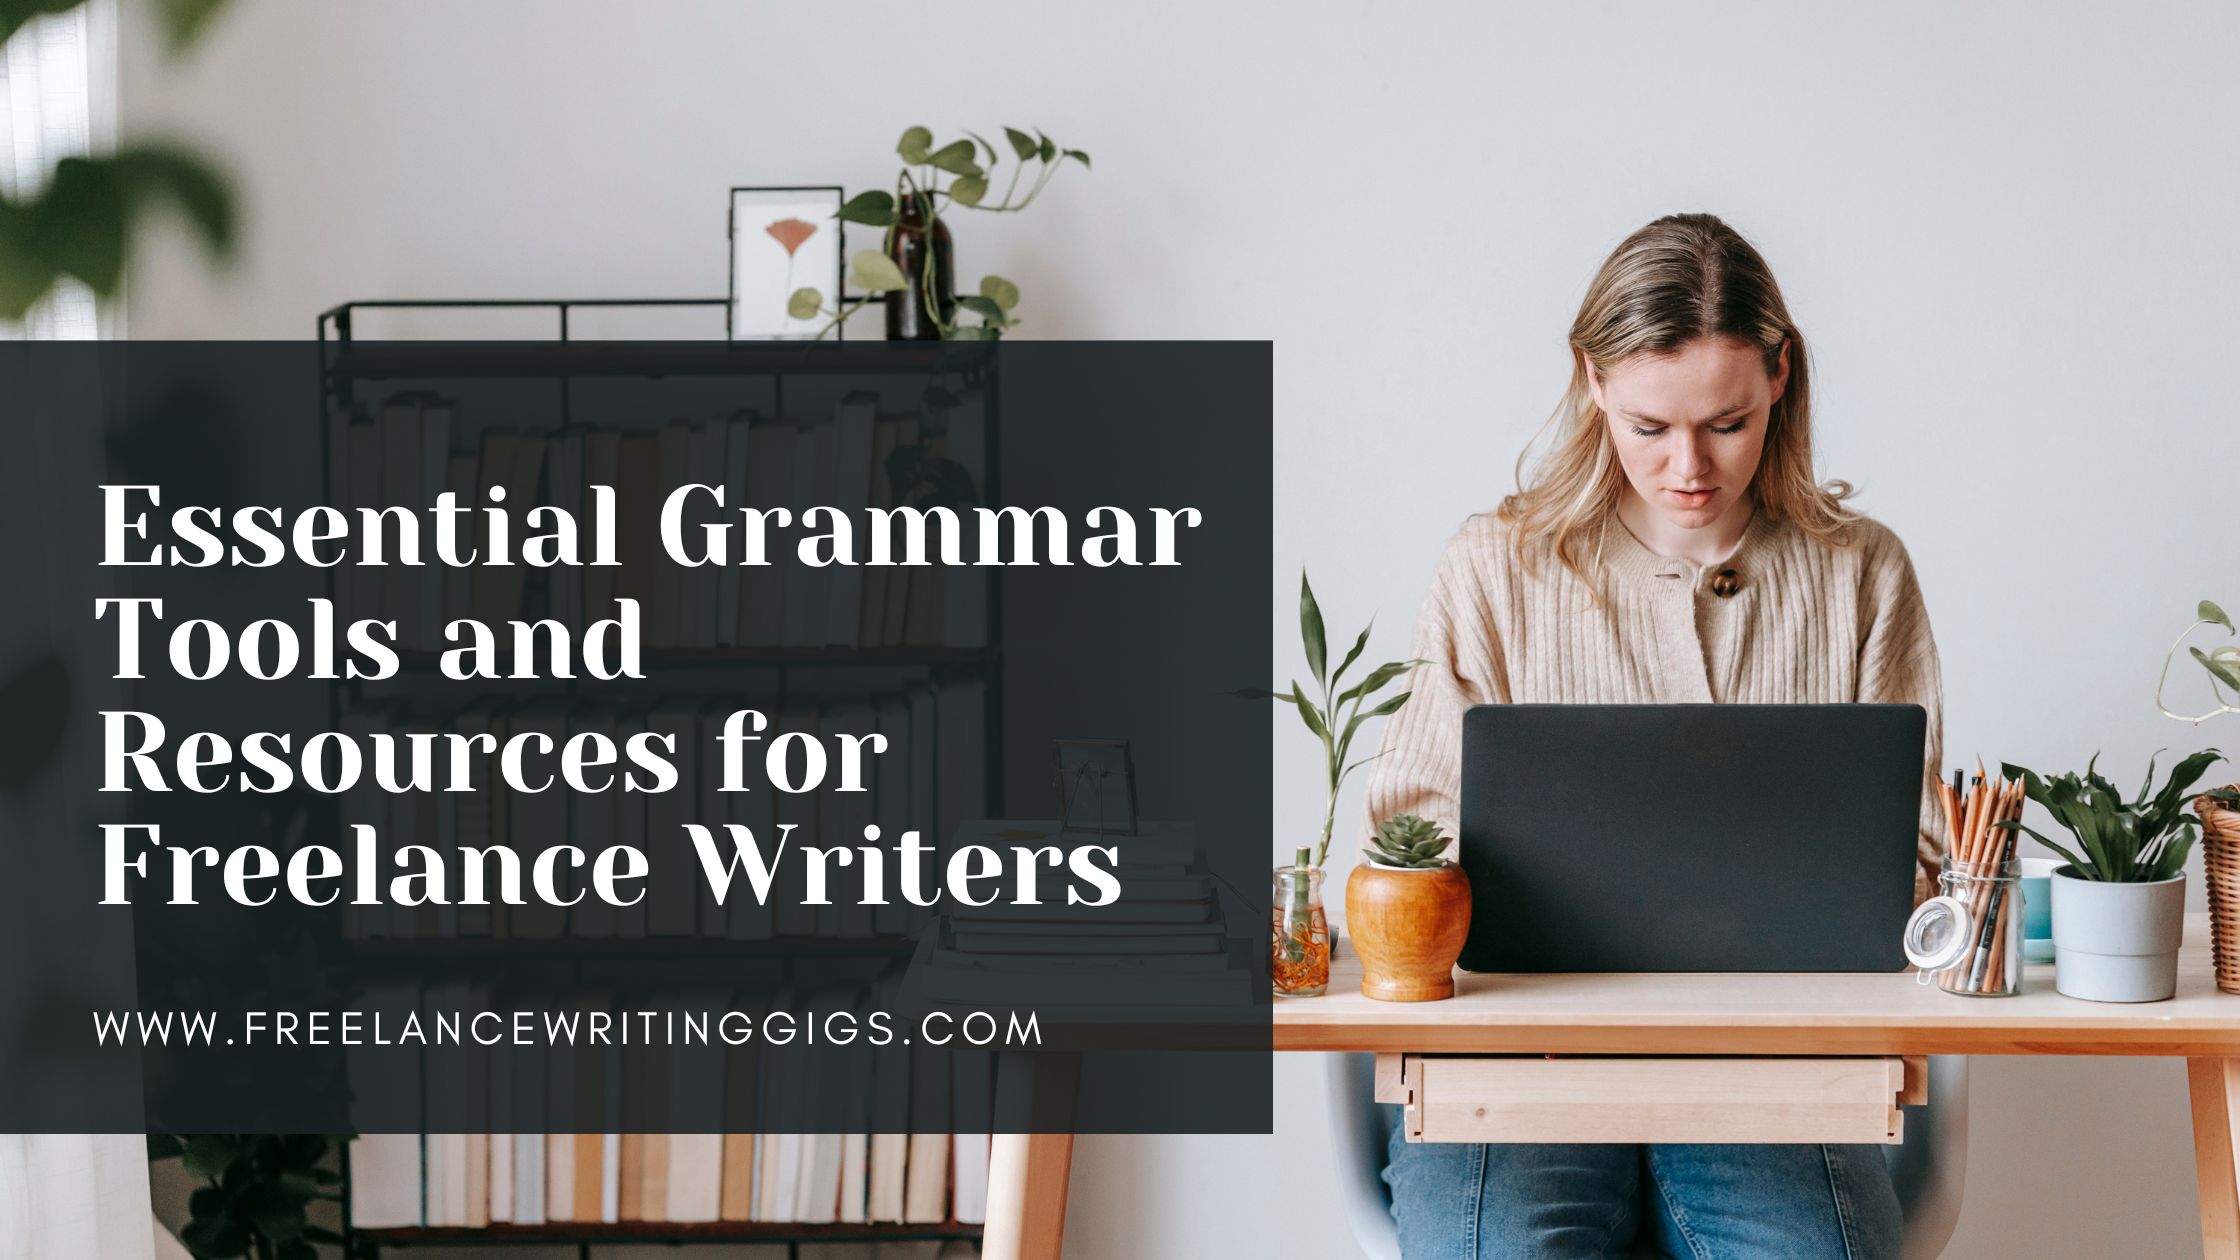 Essential Grammar Tools and Resources for Freelance Writers